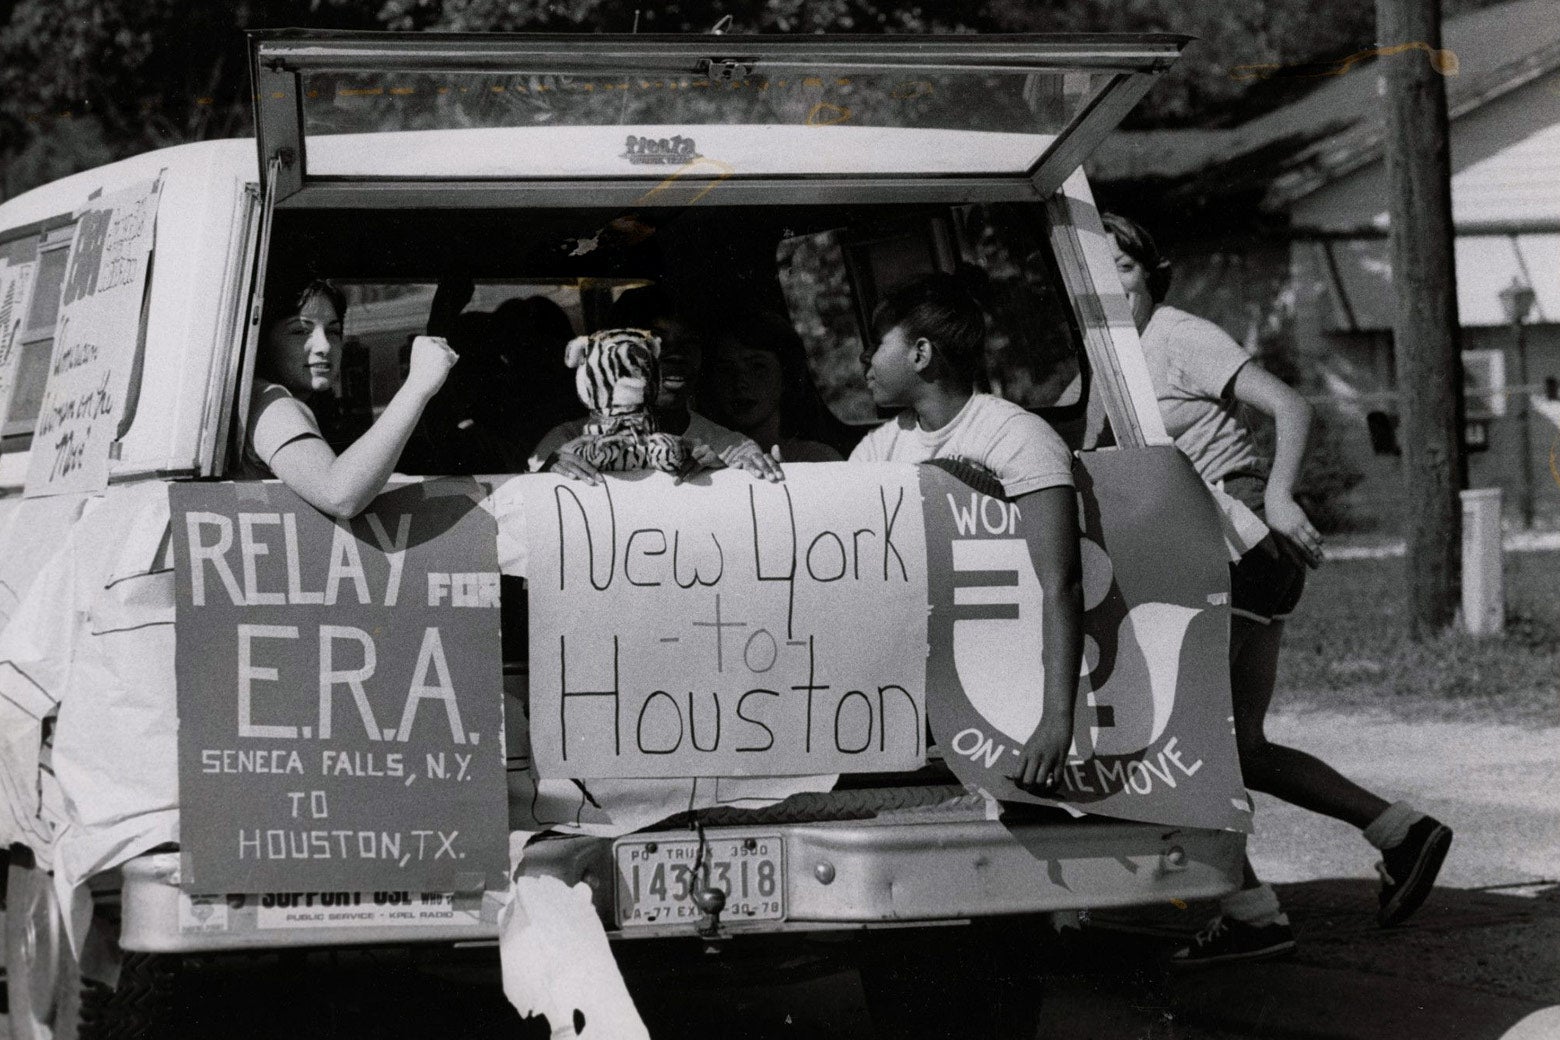 Women embark on the “Relay for ERA” from Seneca Falls, New York (site of the first women’s rights convention), to Houston (site of the National Women’s Conference) in 1977.